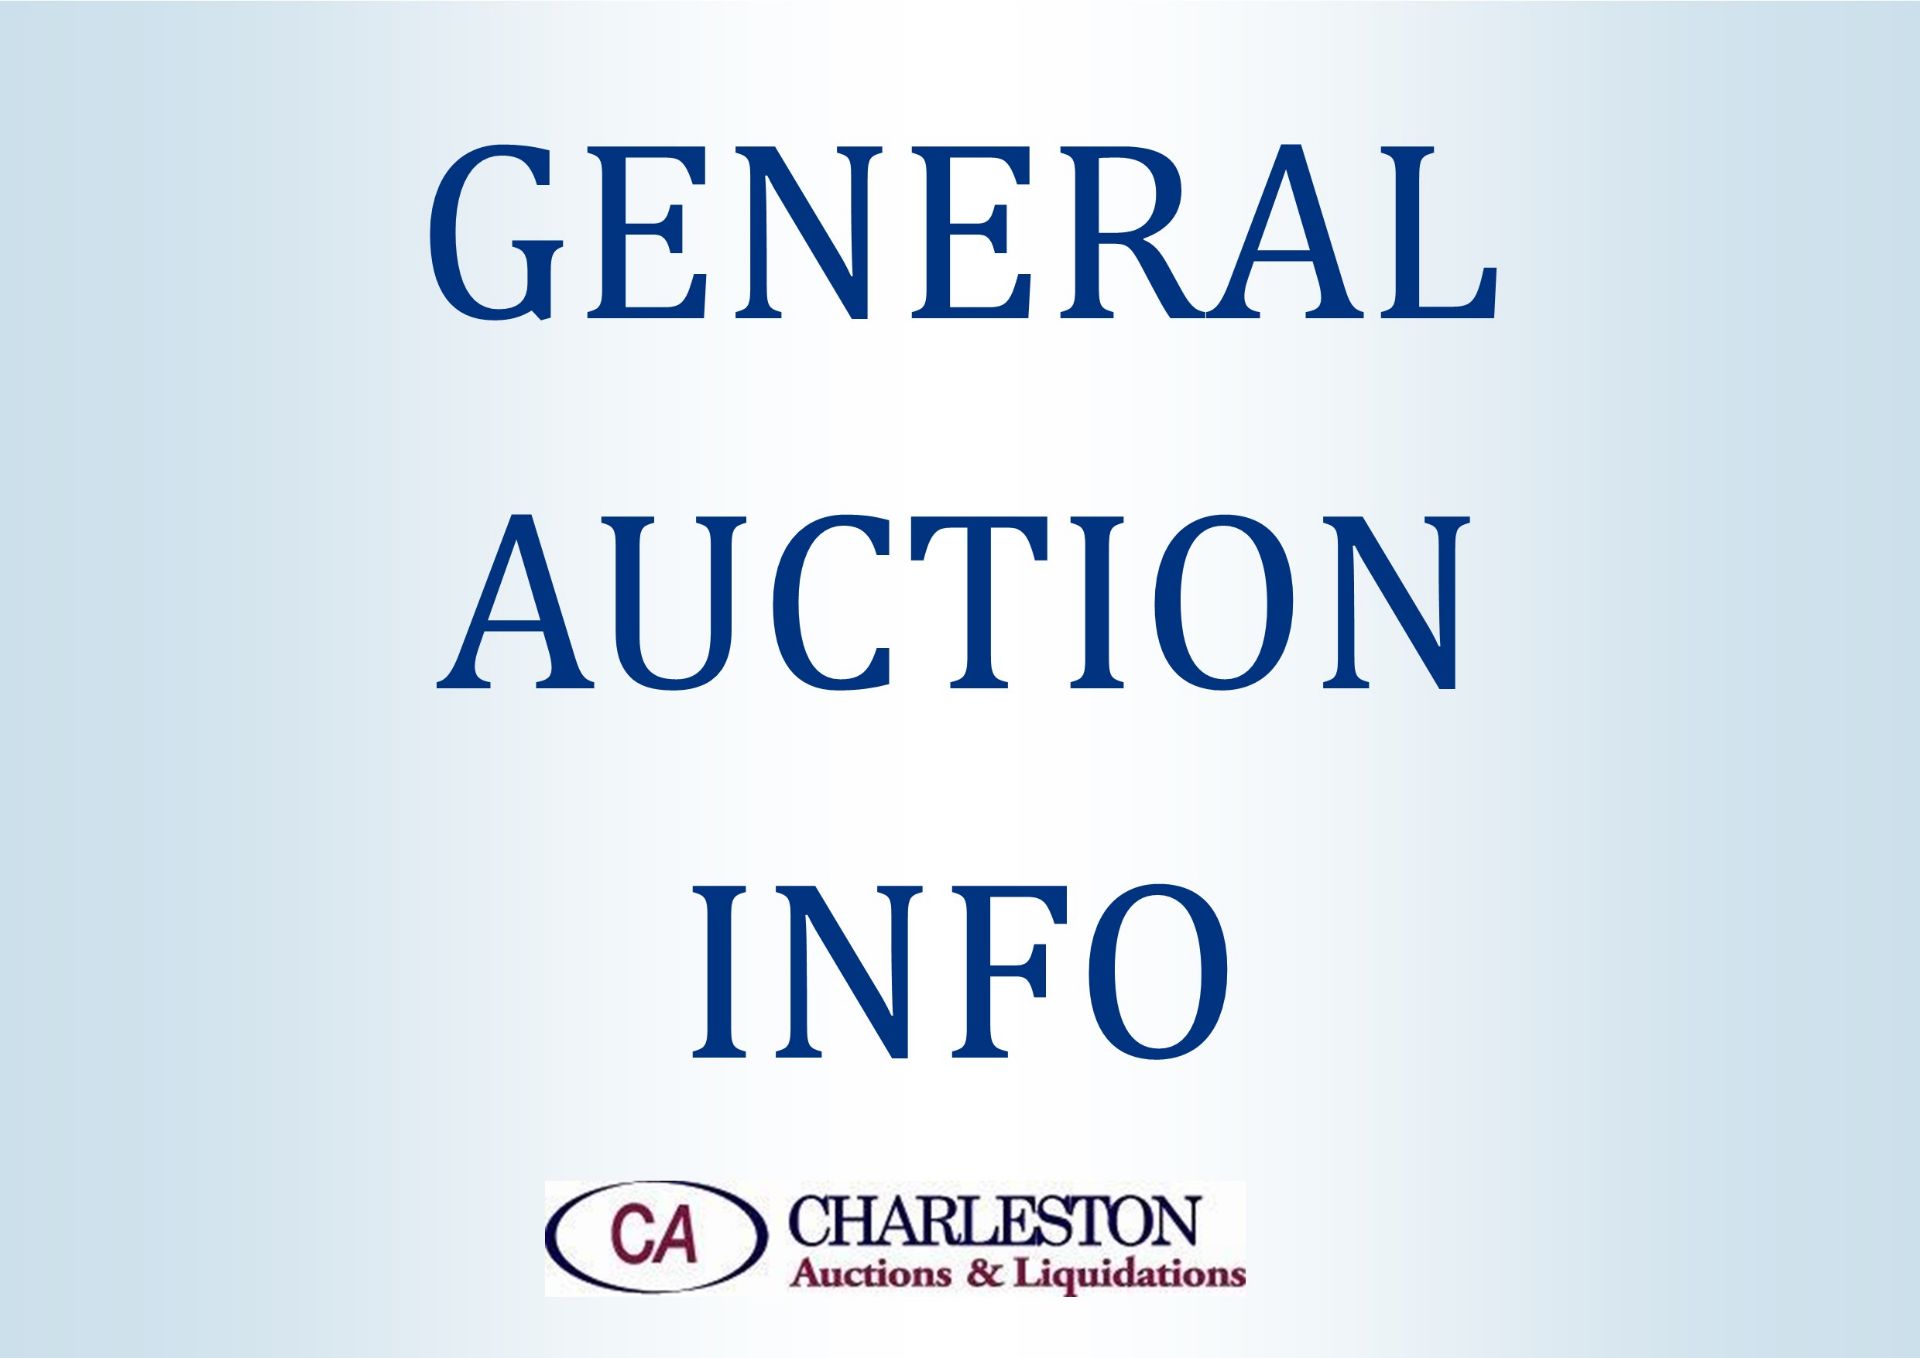 Timed online only auction begins closing on Thursday, April 25th at 10 AM EST. The equipment is